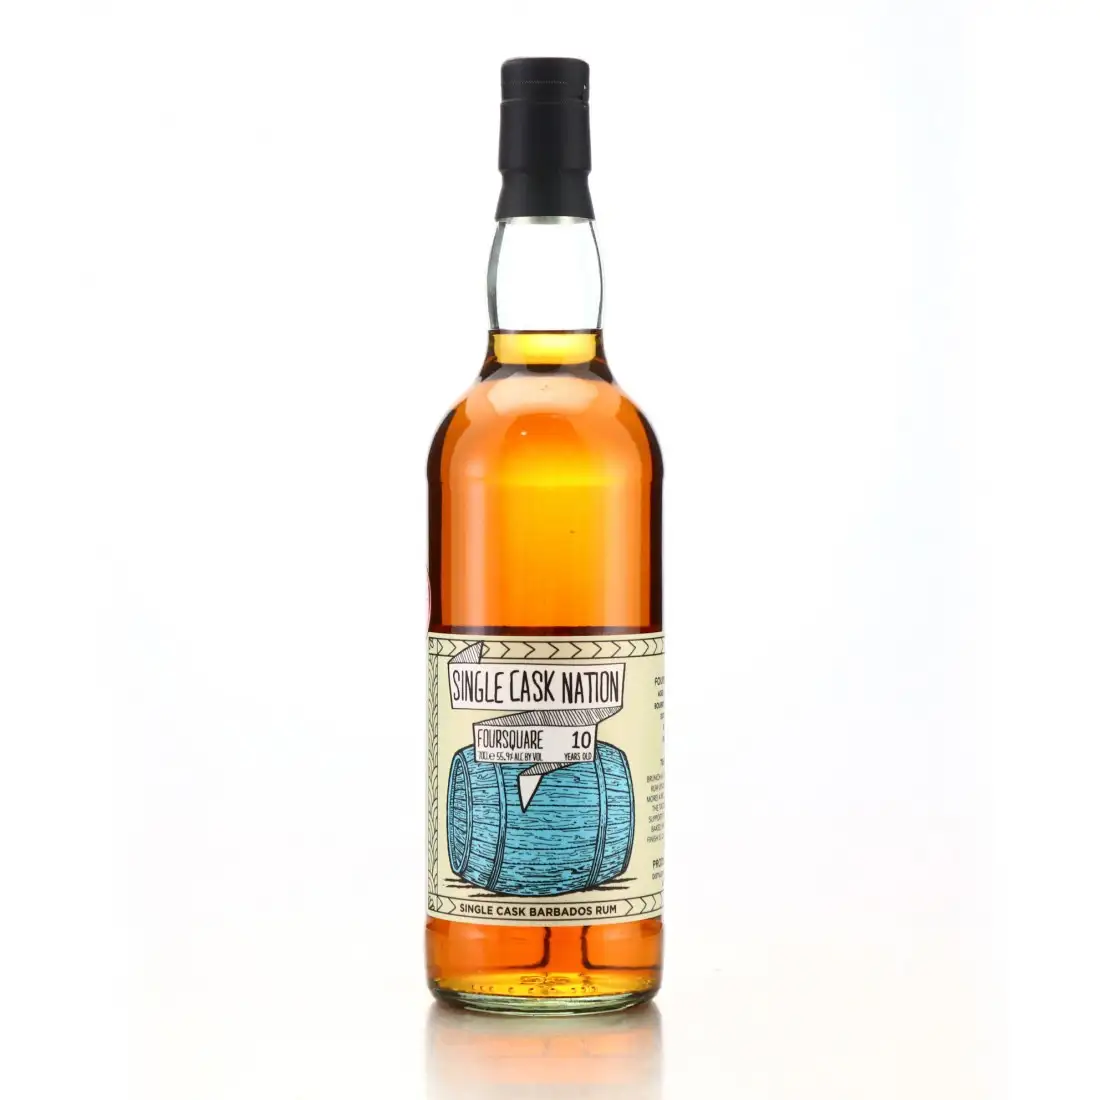 Image of the front of the bottle of the rum Barbados Rum